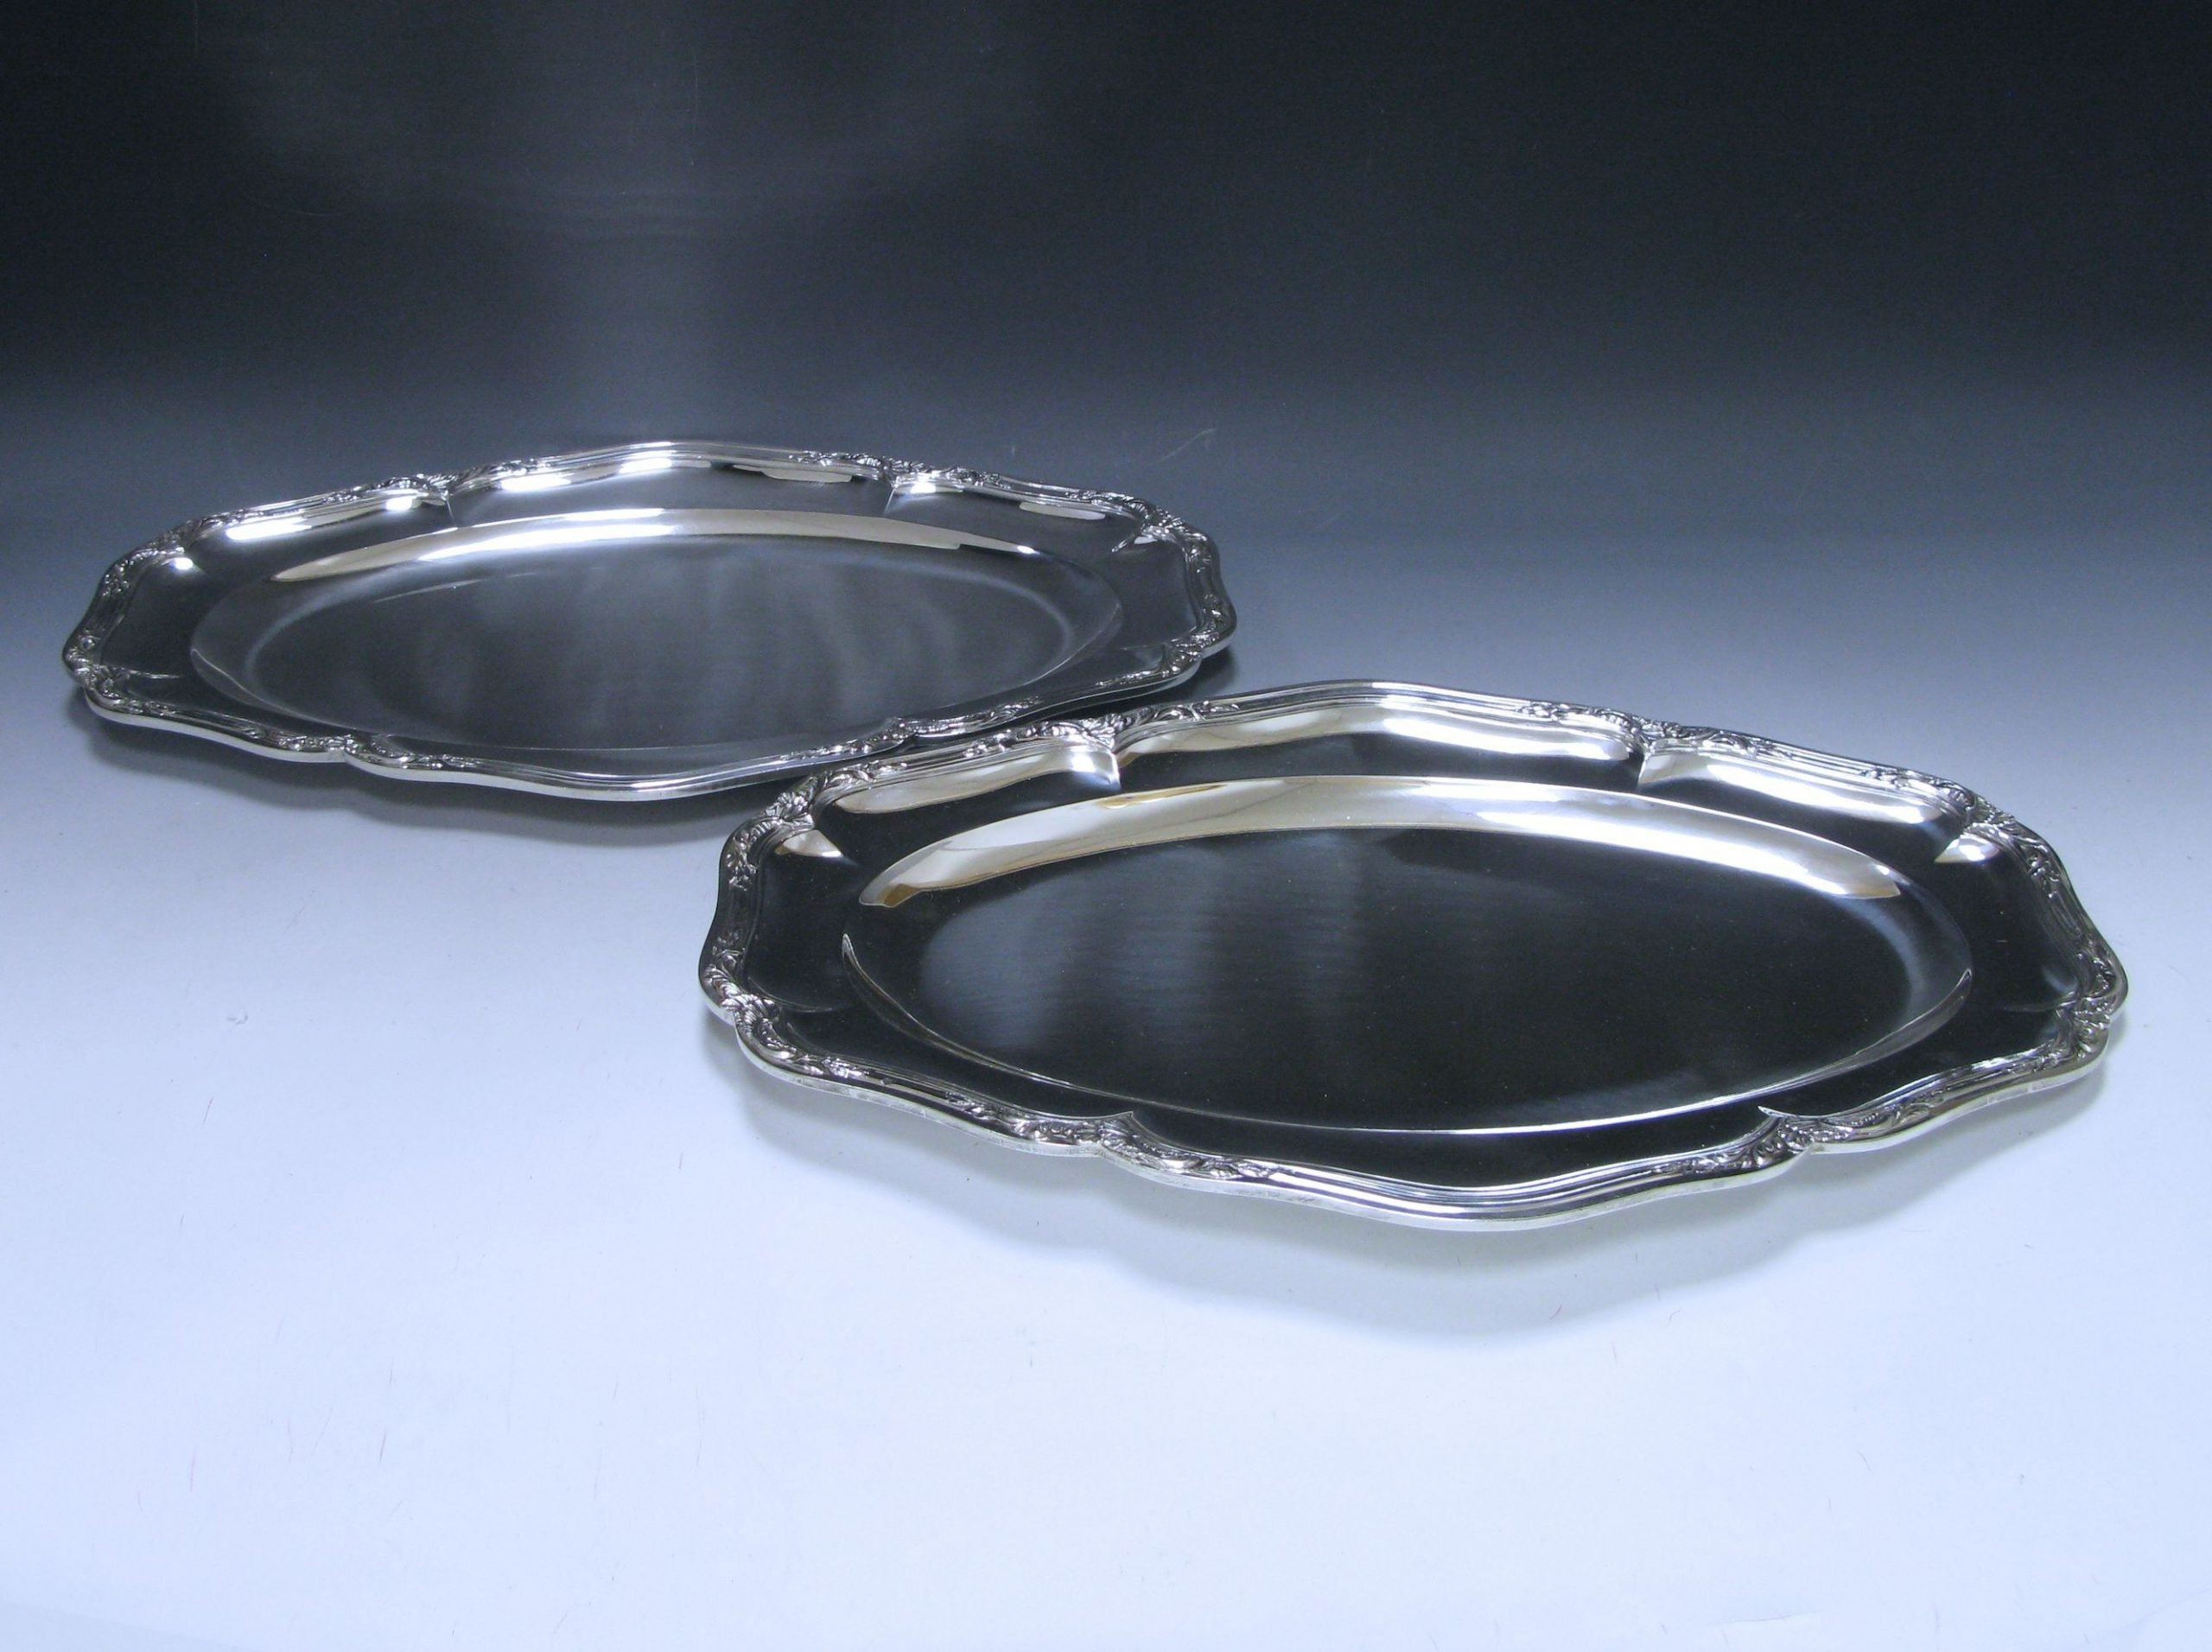 A pair of Antique Silver French Meat Dishes  1